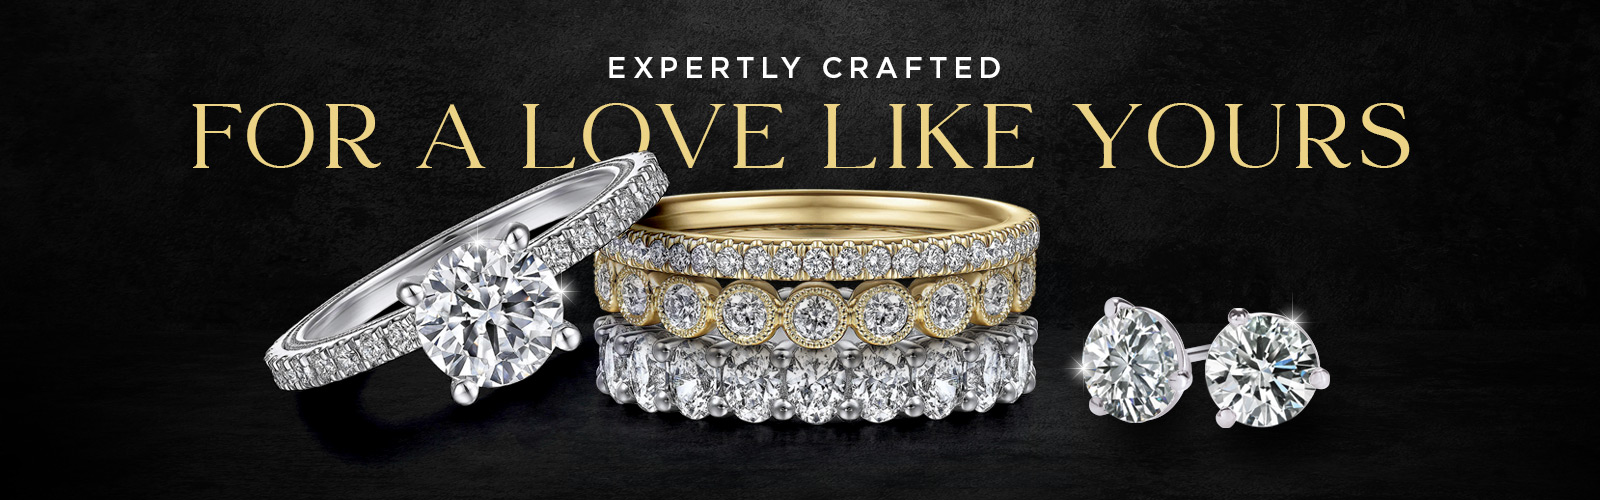 Bentley Diamond - Expertly Crafted Jewelry